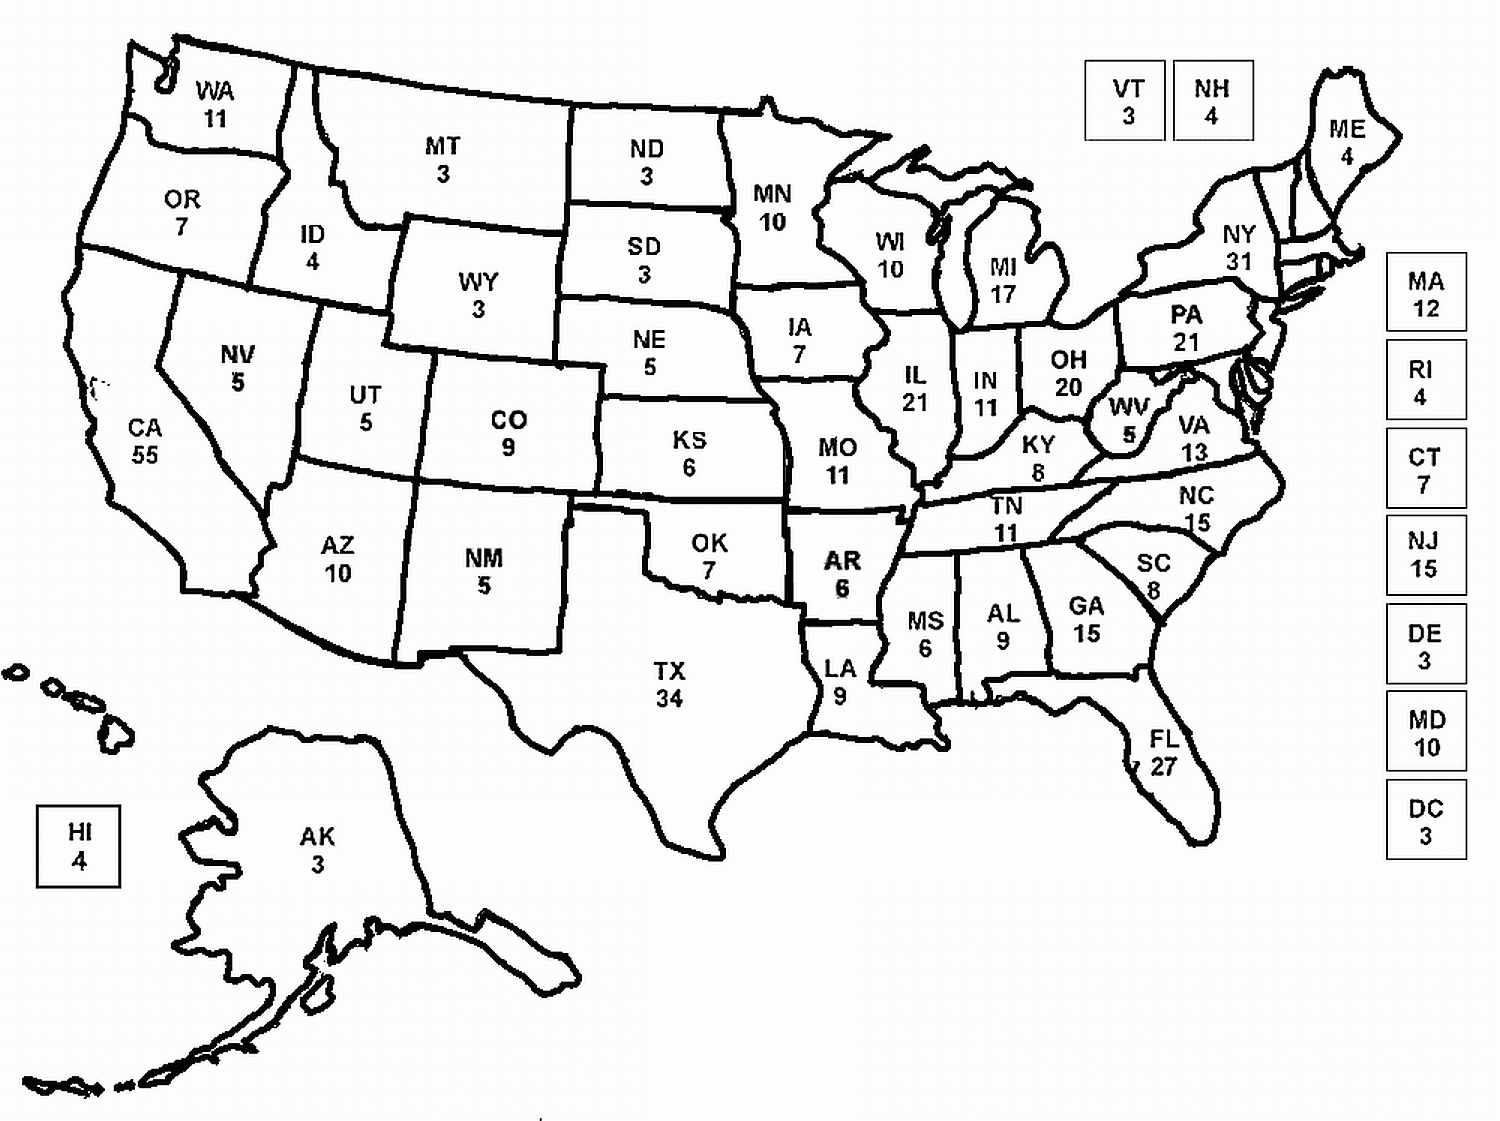 Free Coloring Page Map Of Usa Download Free Coloring Page Map Of Usa